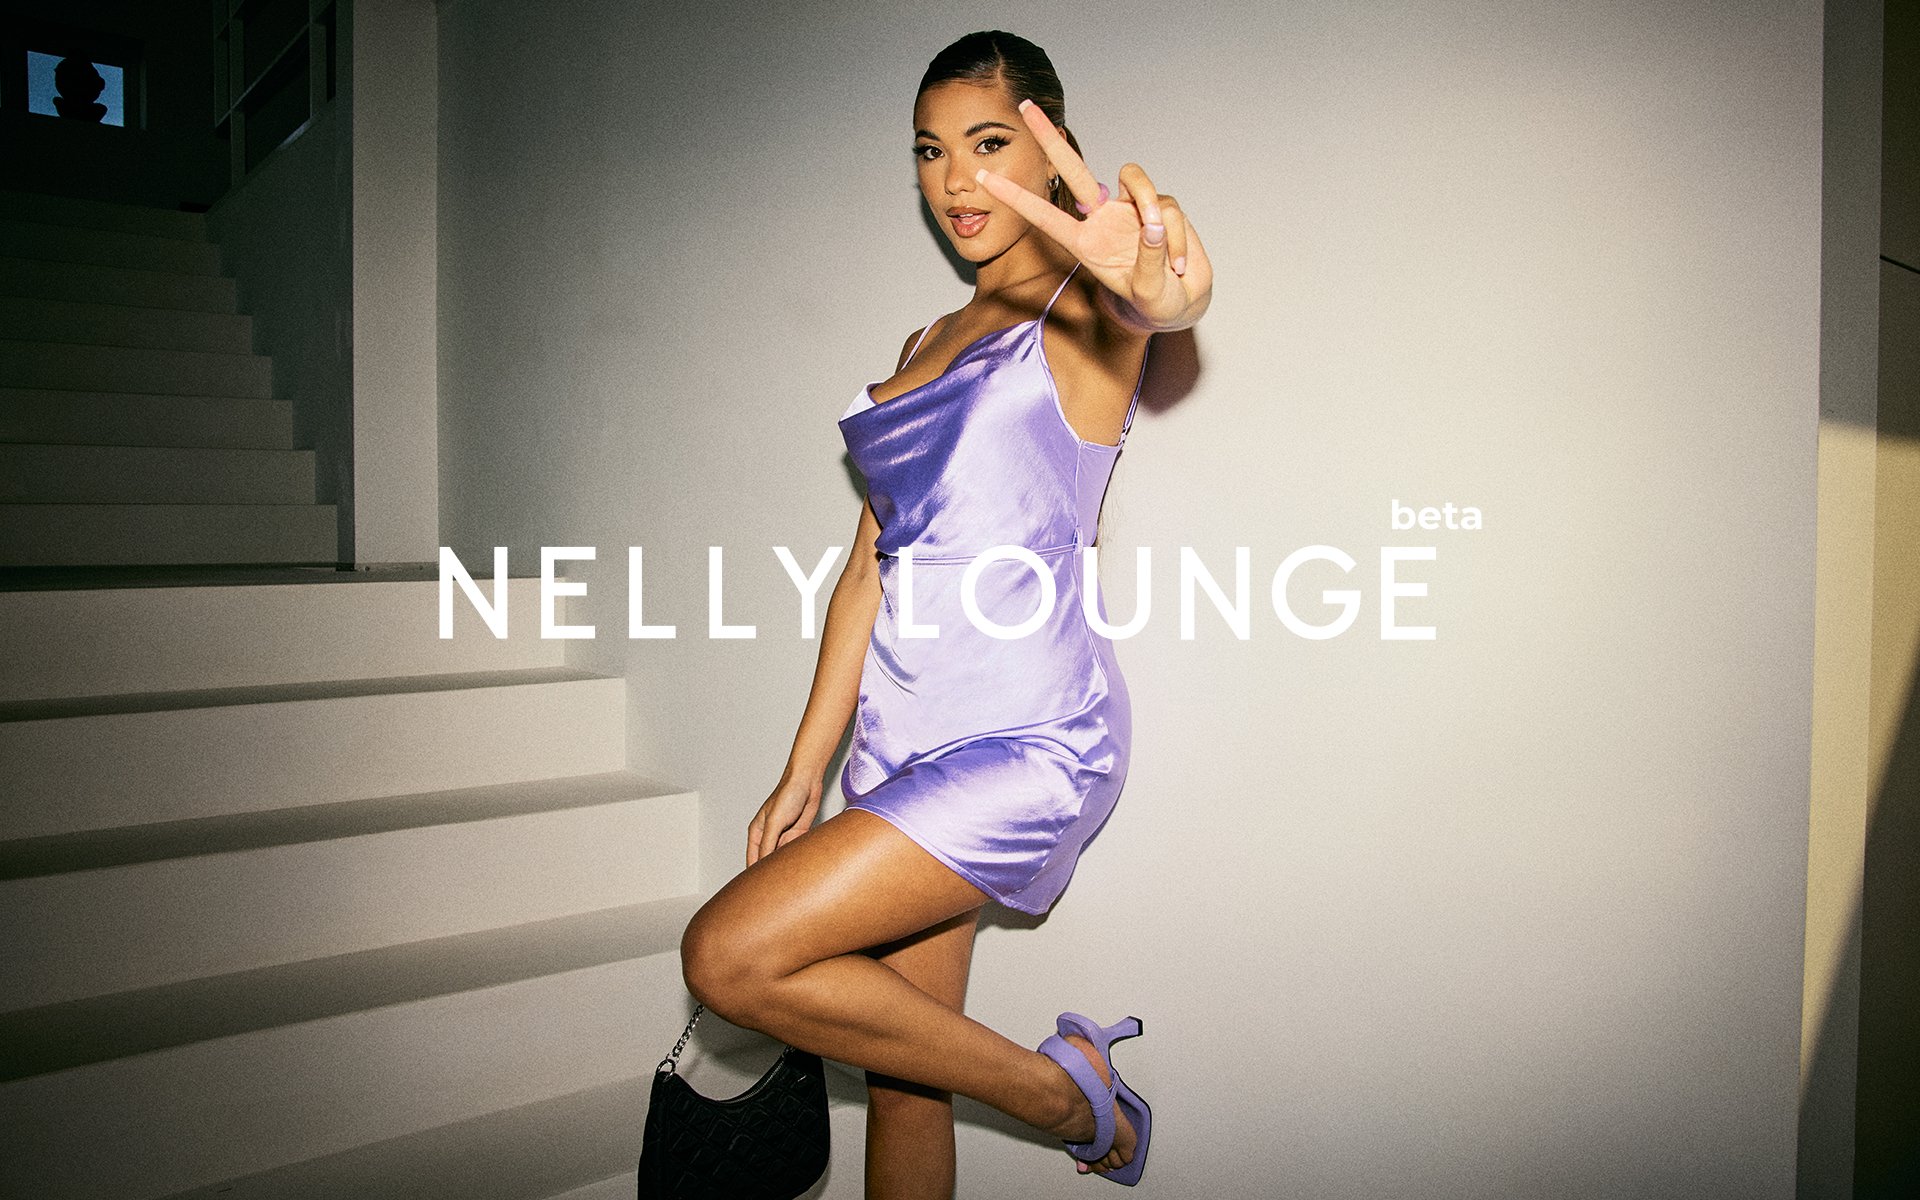 Nelly fashion community launch with TokyWoky